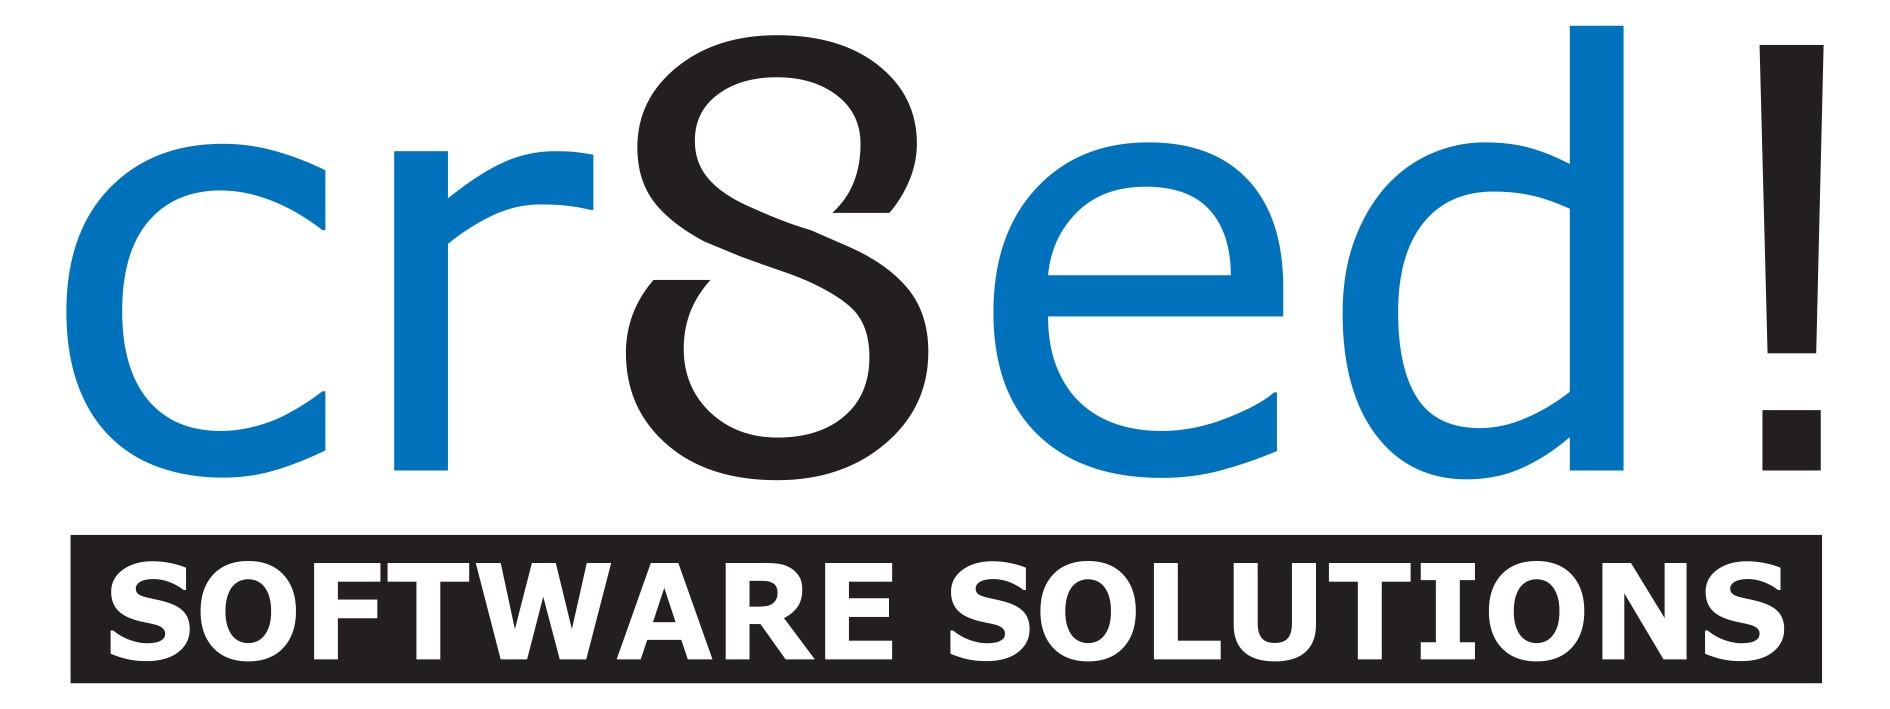 Created Software Solutions